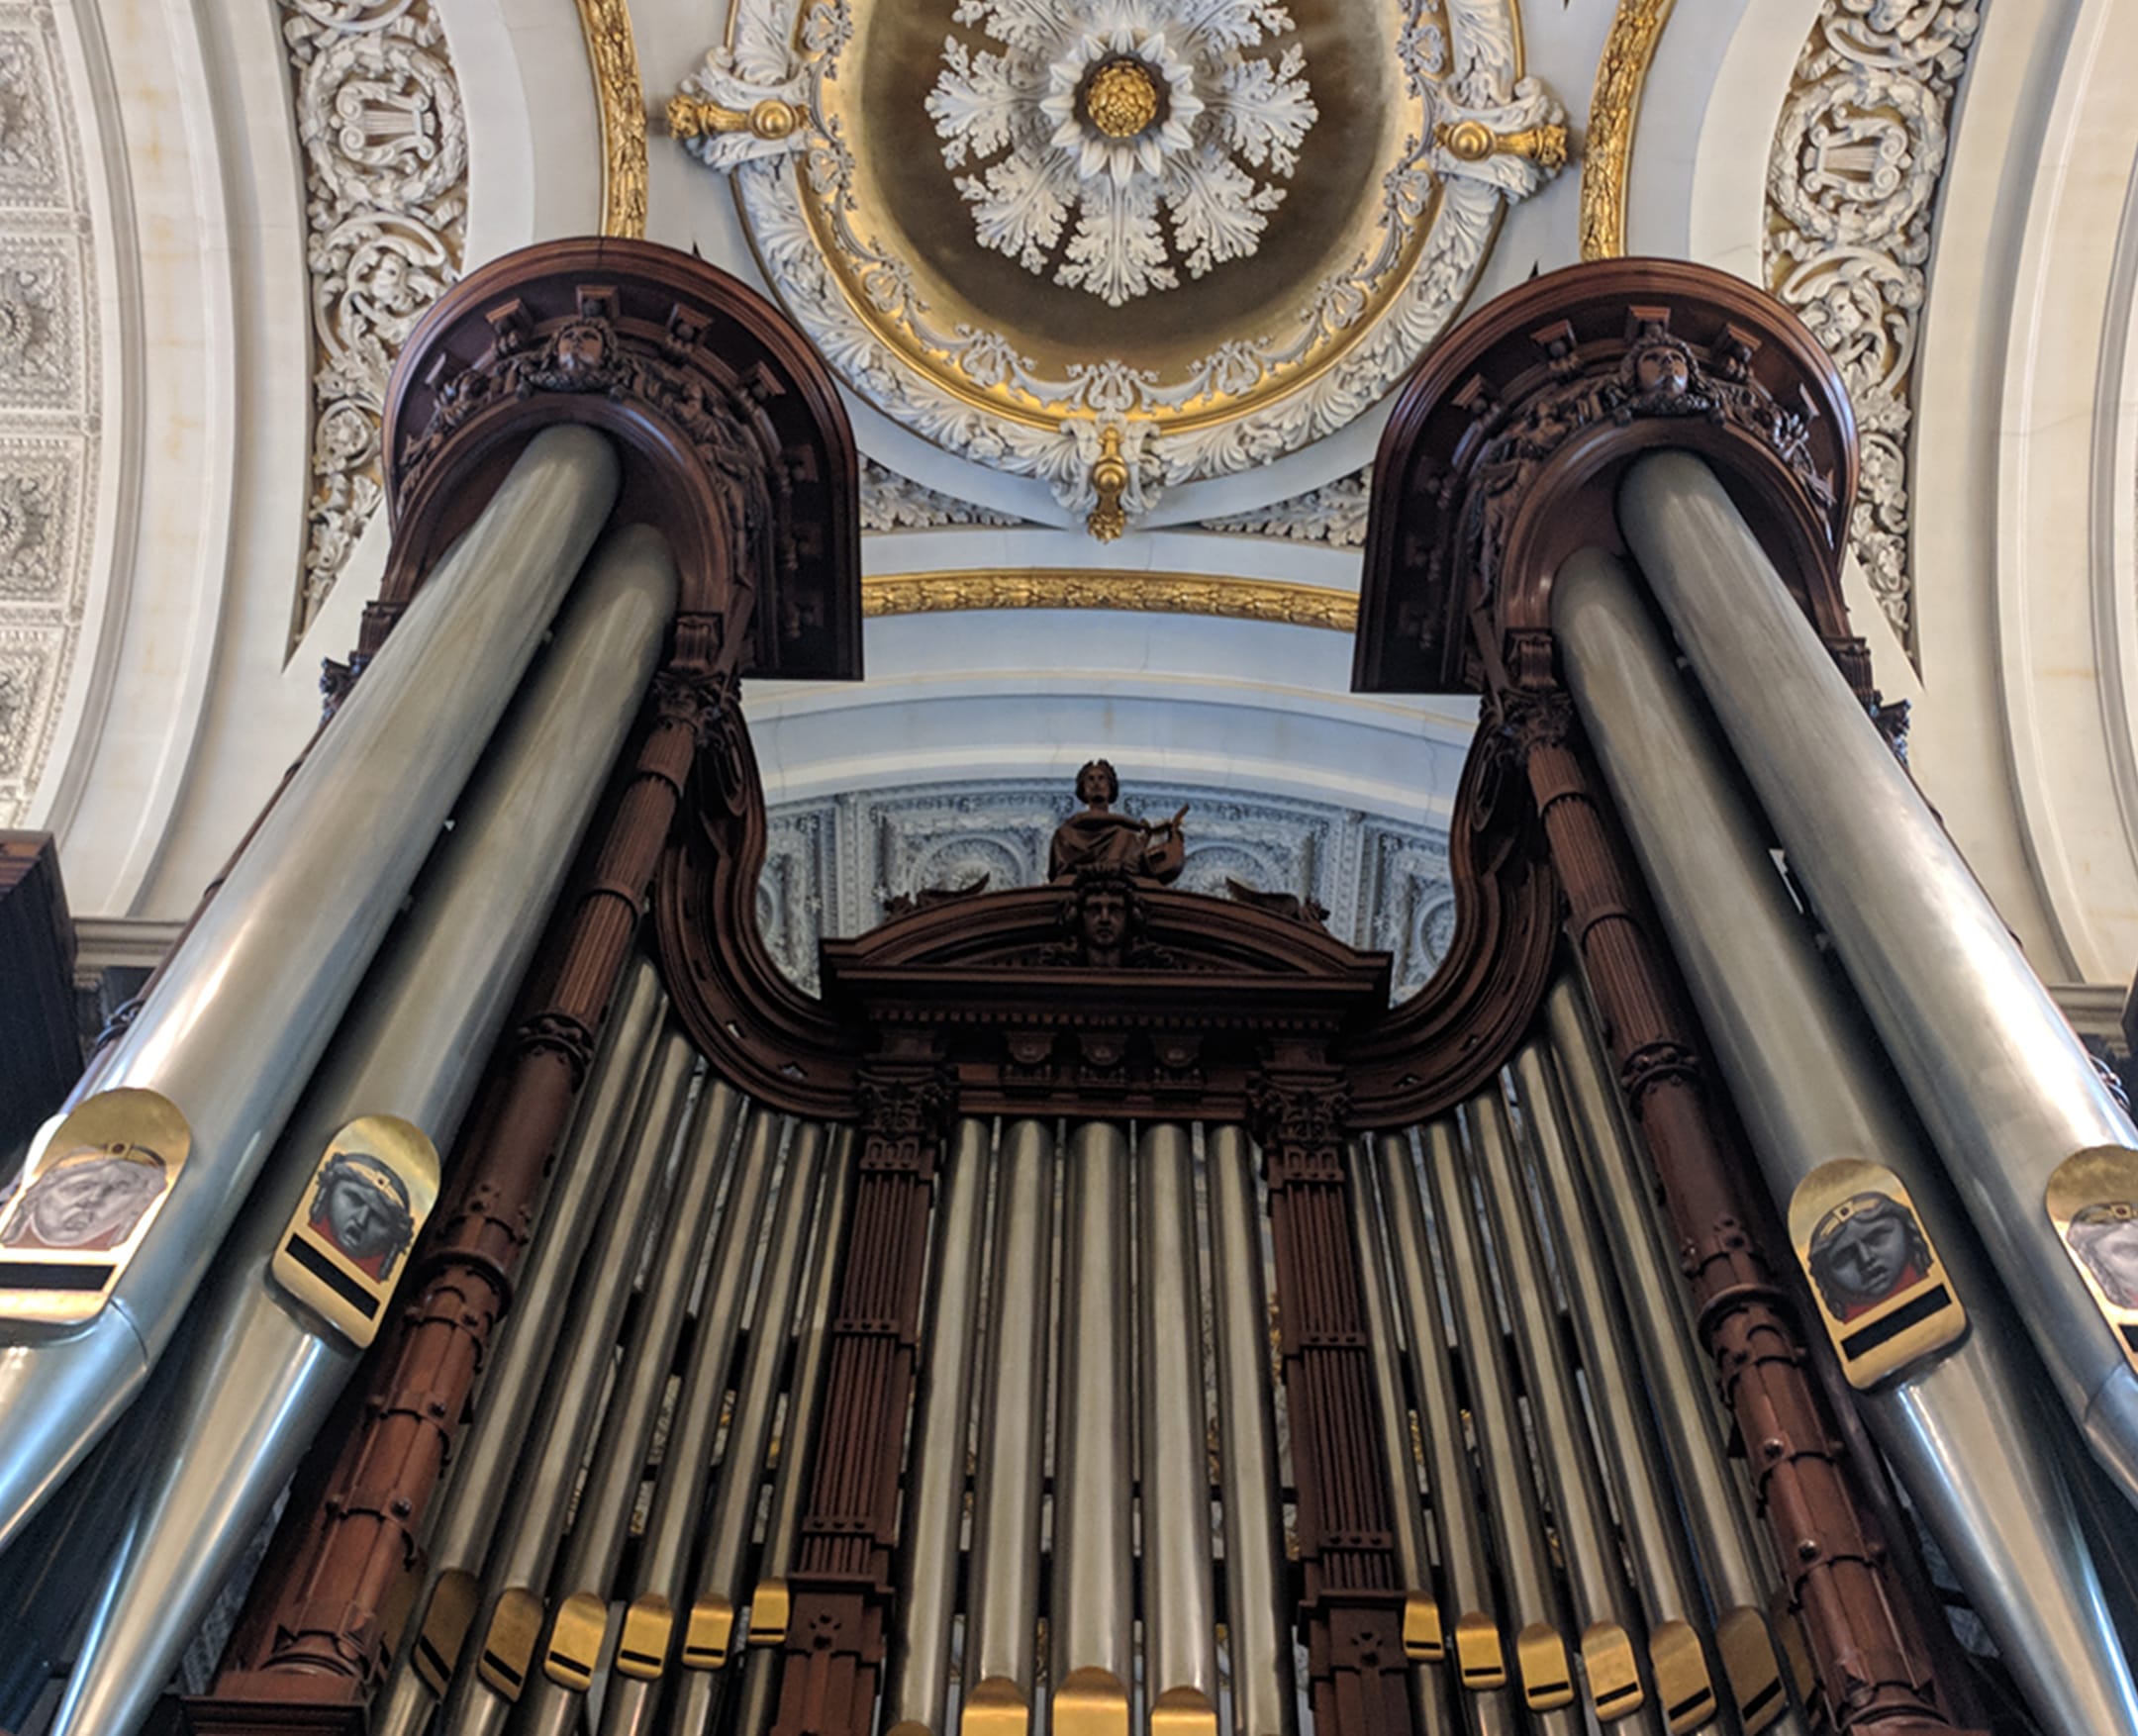 The organ and ceiling of the Methuen Memorial Music Hall